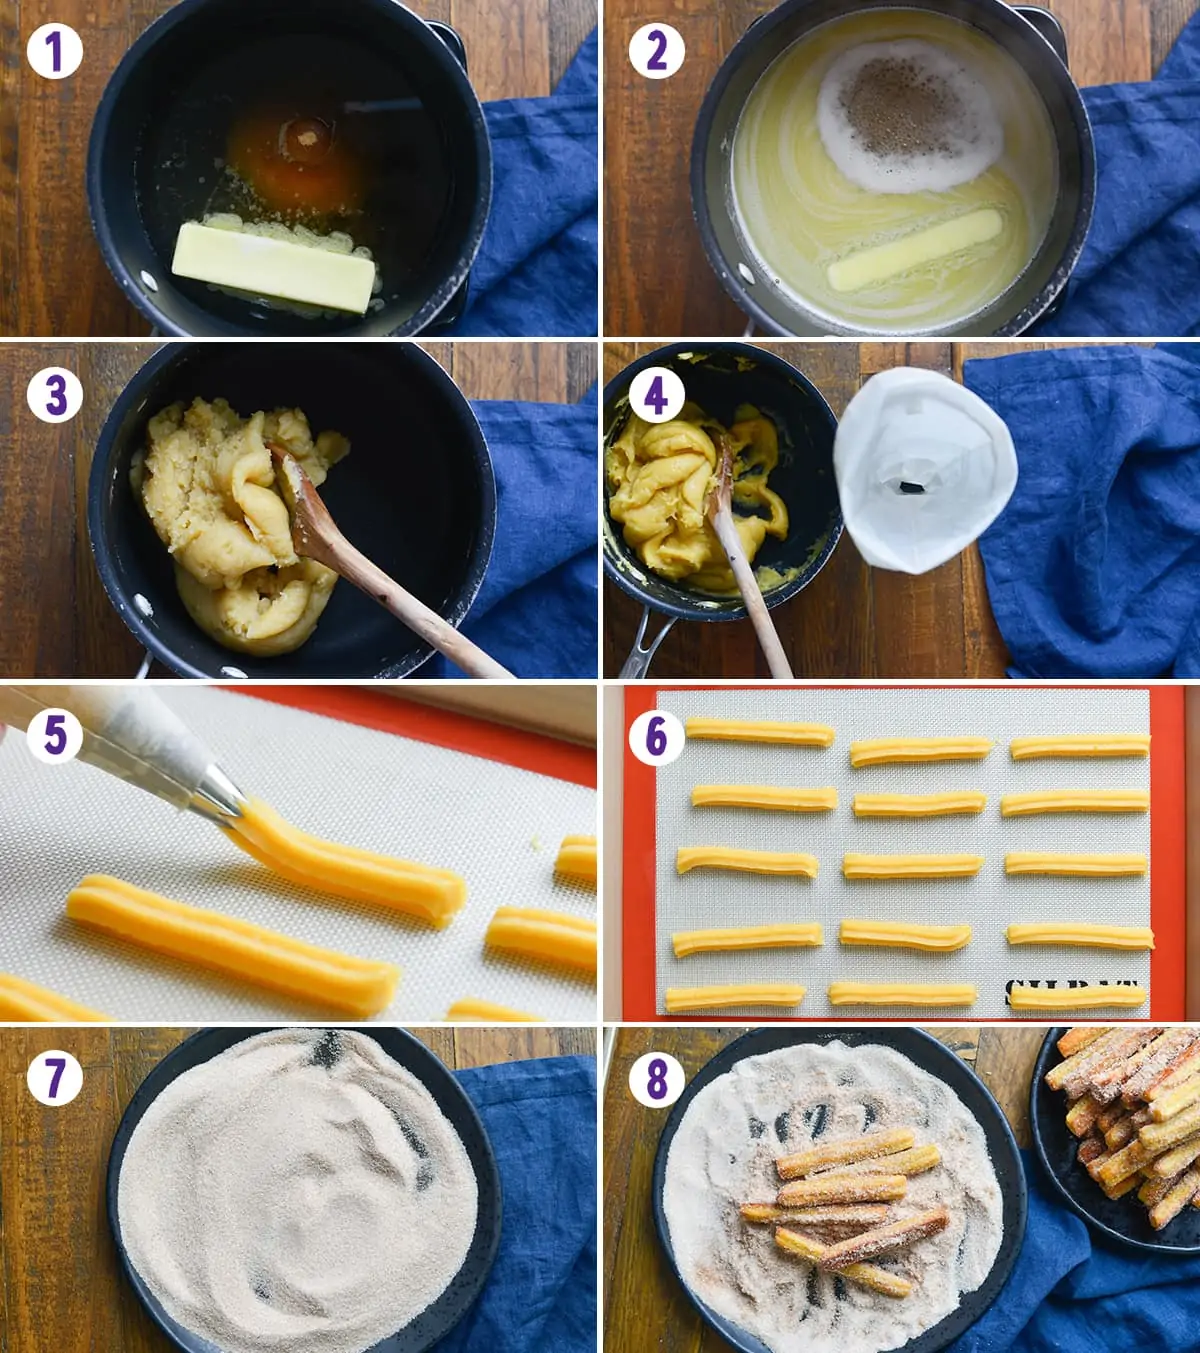 Collage of 8 images showing the process of making churros.